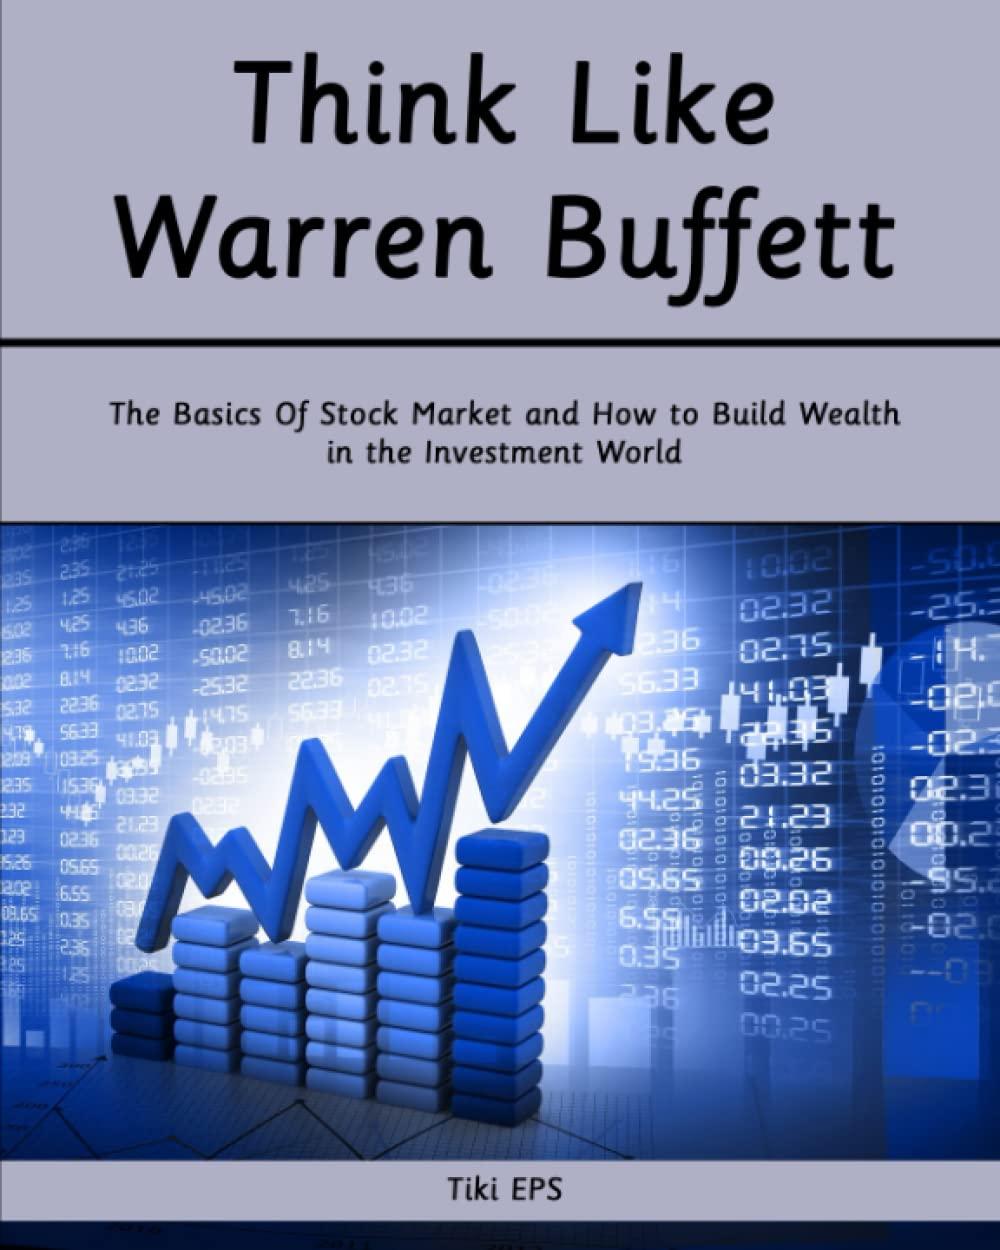 Think Like Warren Buffett The Basics Of Stock Market And How To Build Wealth In The Investment World